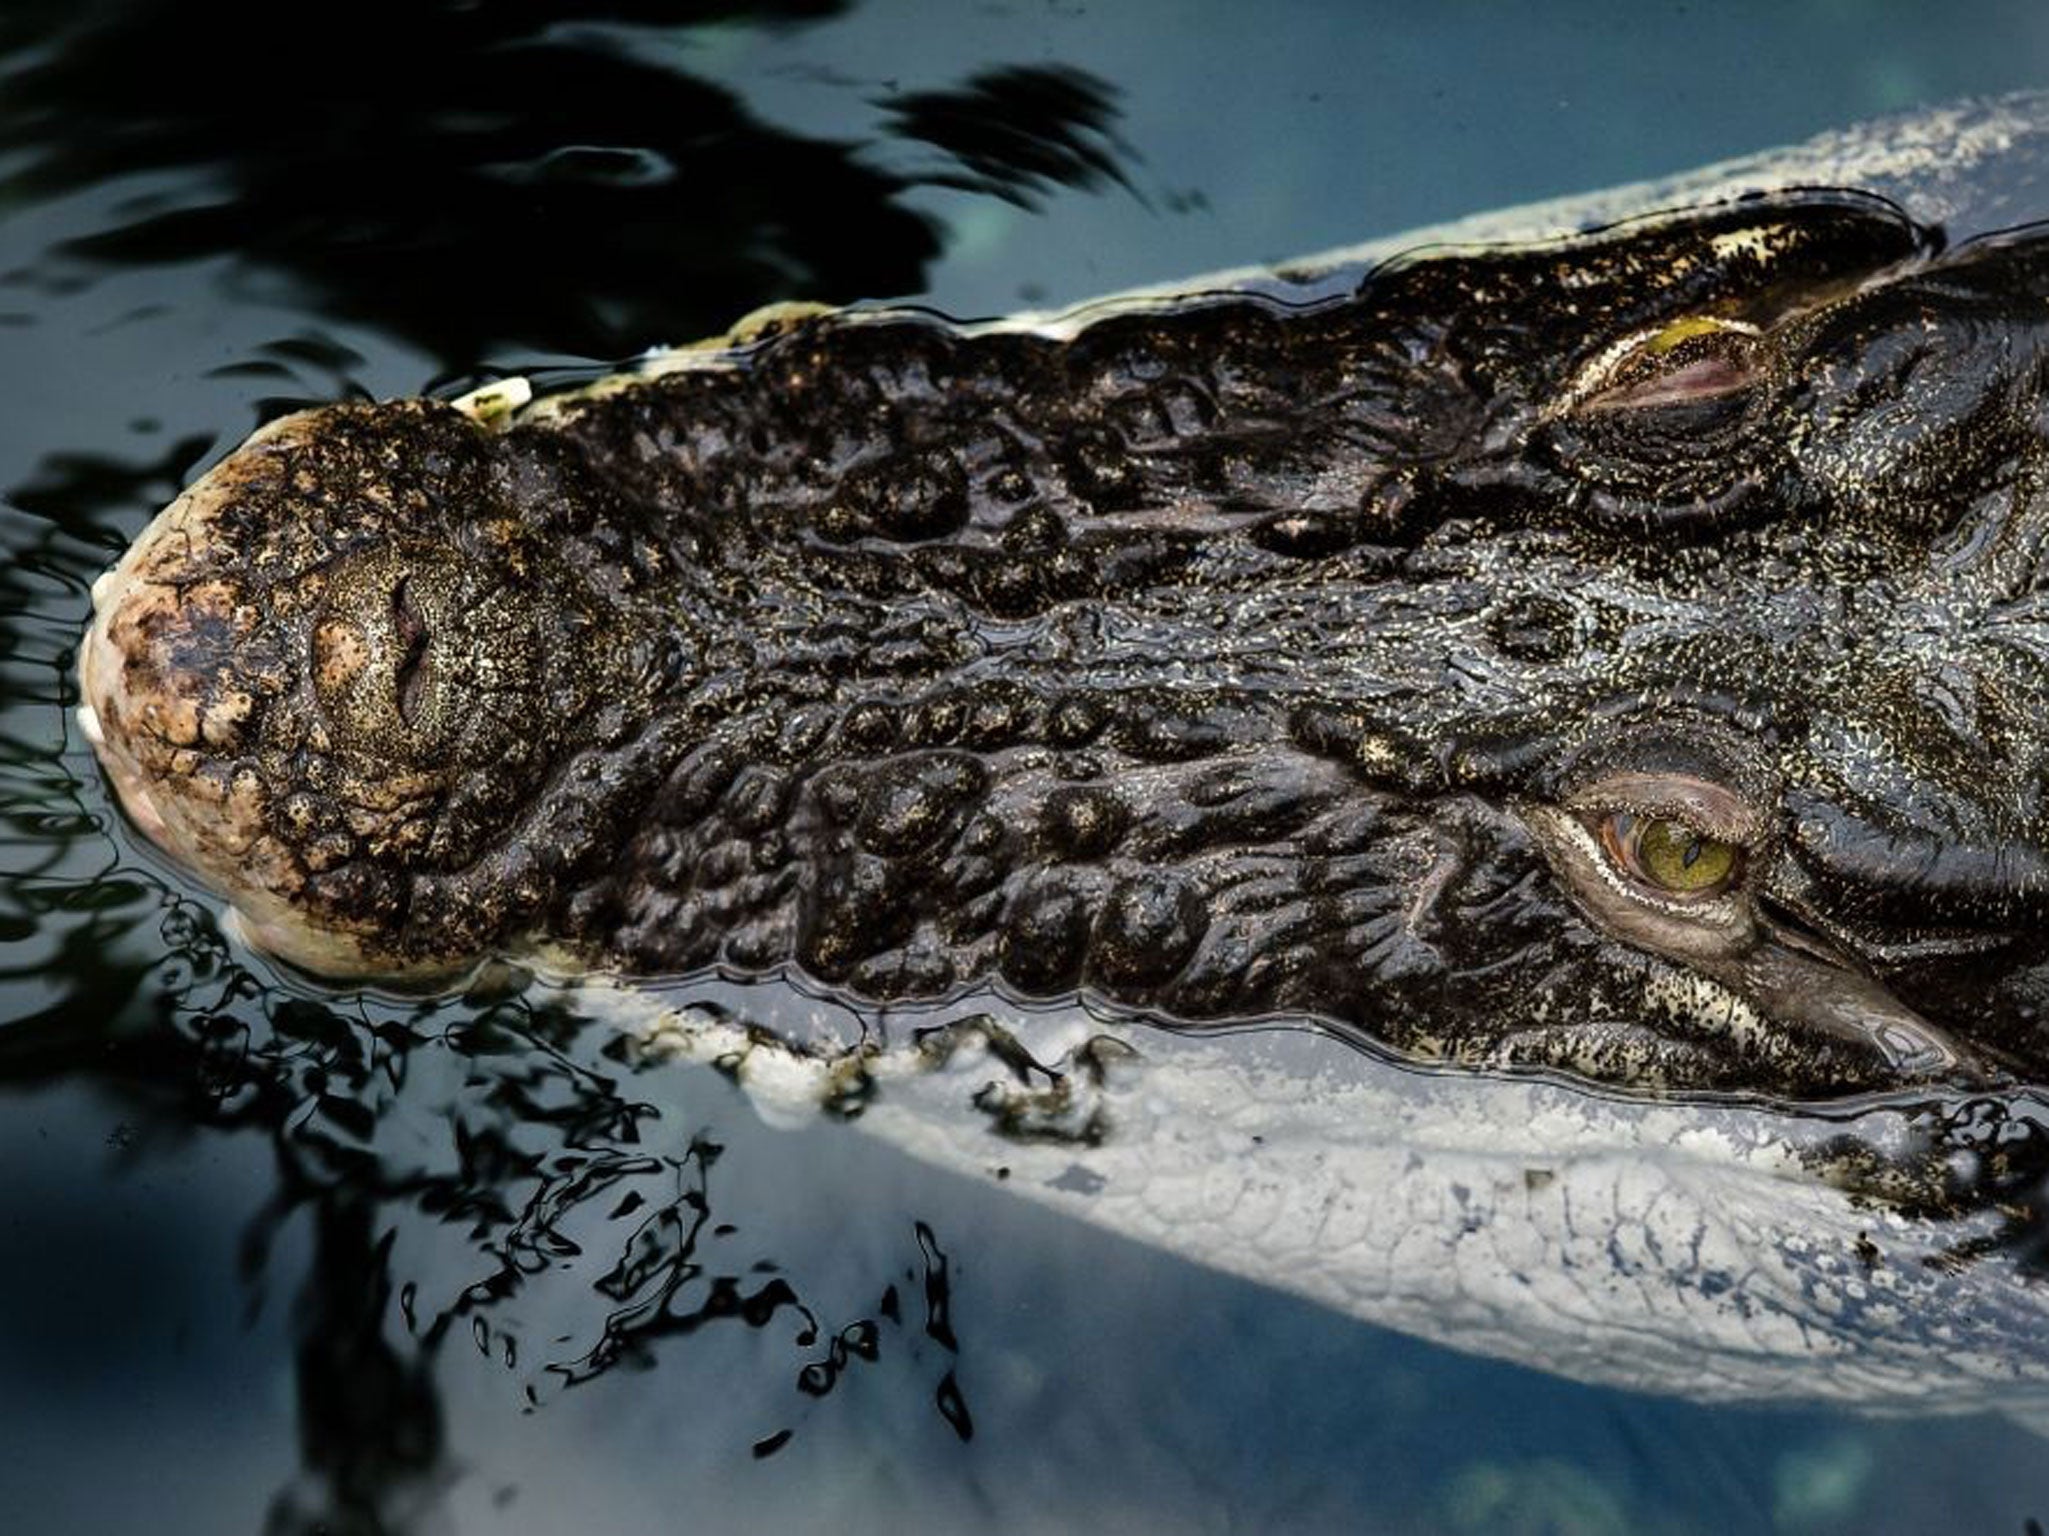 Saltwater crocodiles can weigh up to a ton